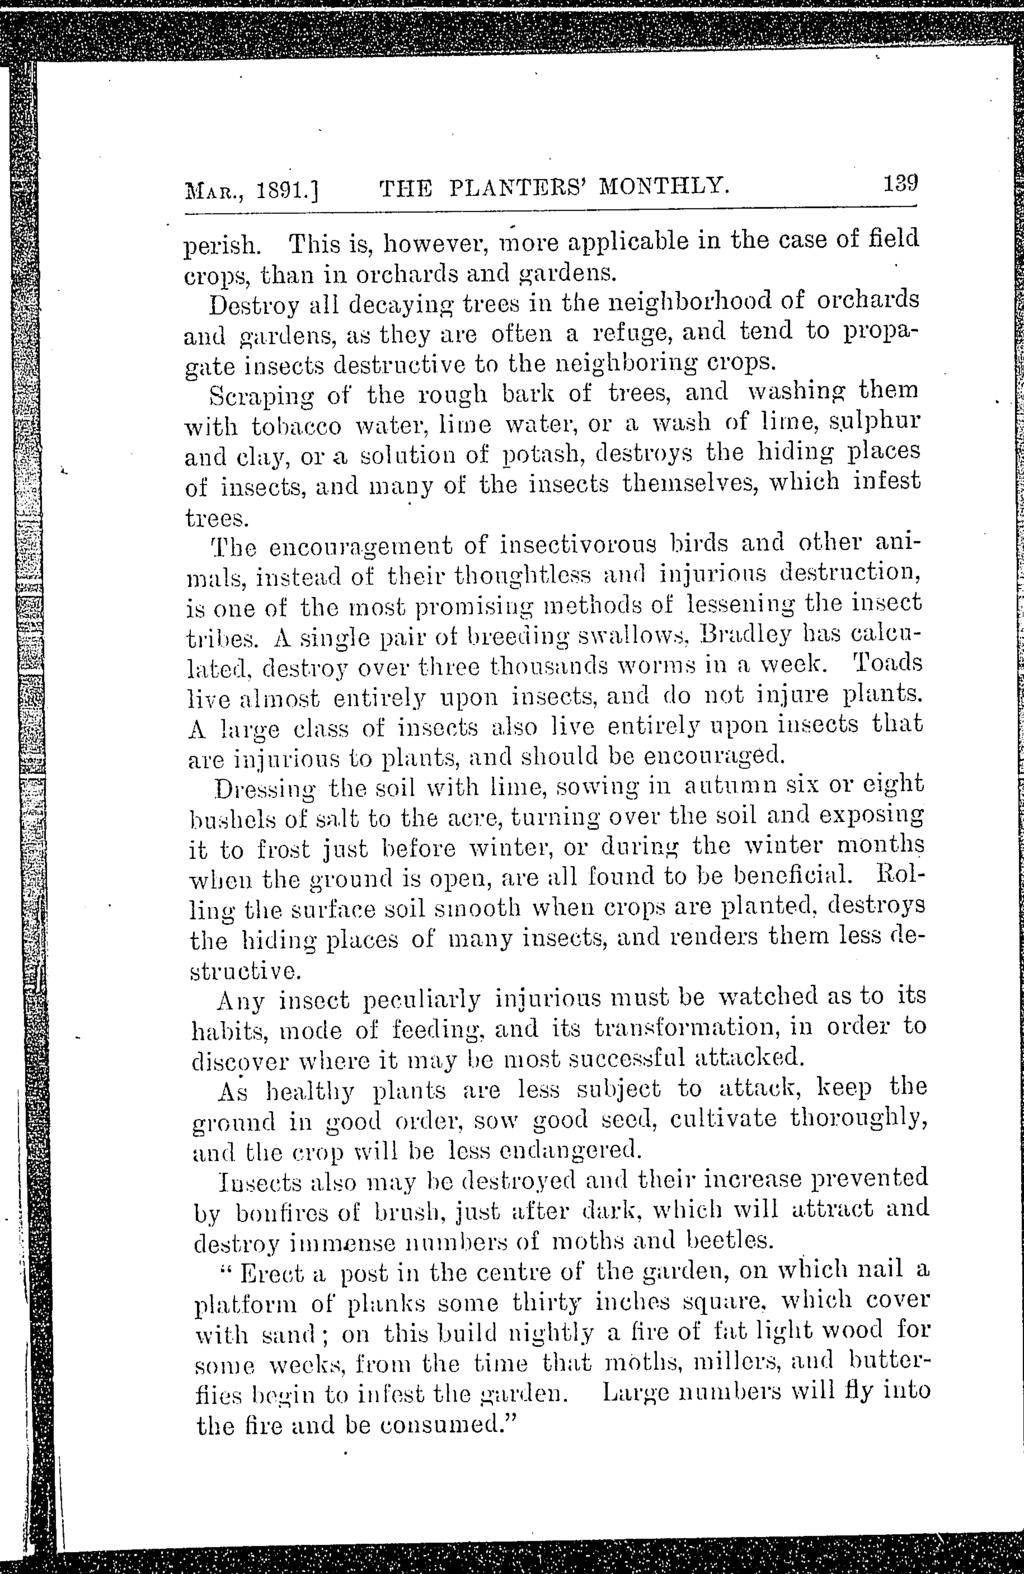 MAR., 1891.] THE PLANTERS' MONTHLY. 139 perish. This is, however, l{lore applicable in the case of field crops, than in orcl1l1,rds and gardens.